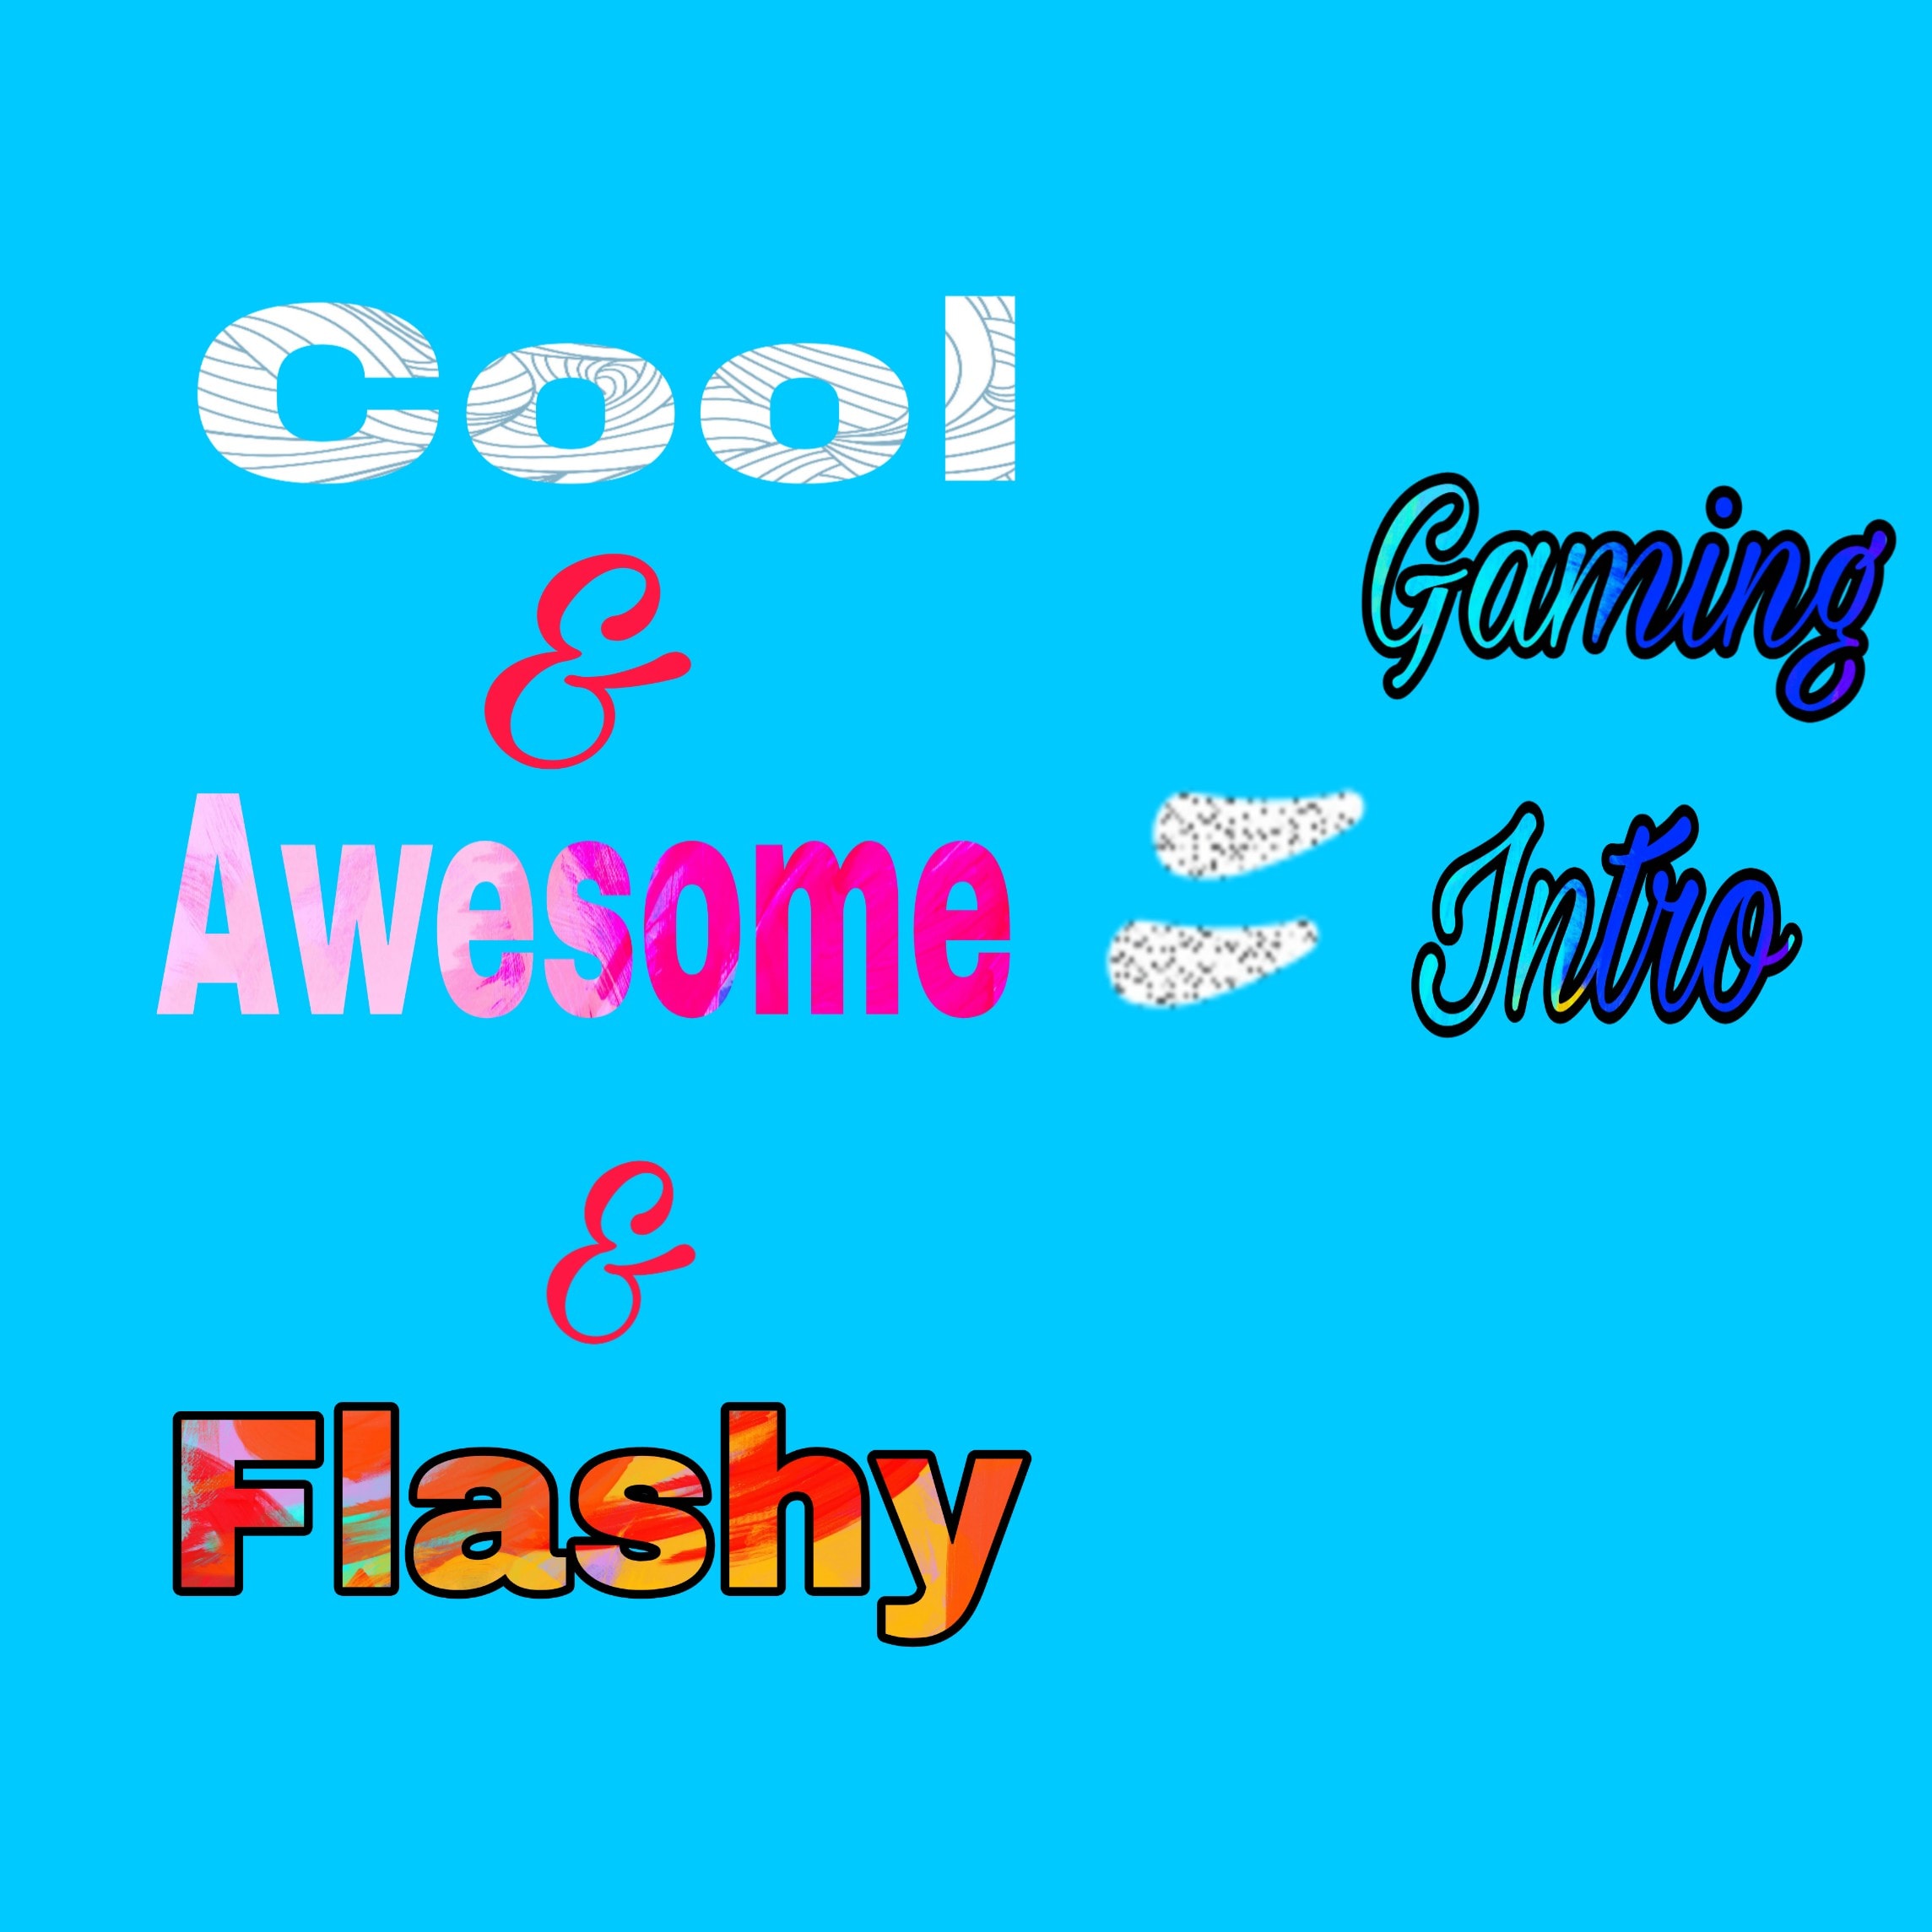 Design You A Cool Gaming Intro With Your Name By Roboticyoussef